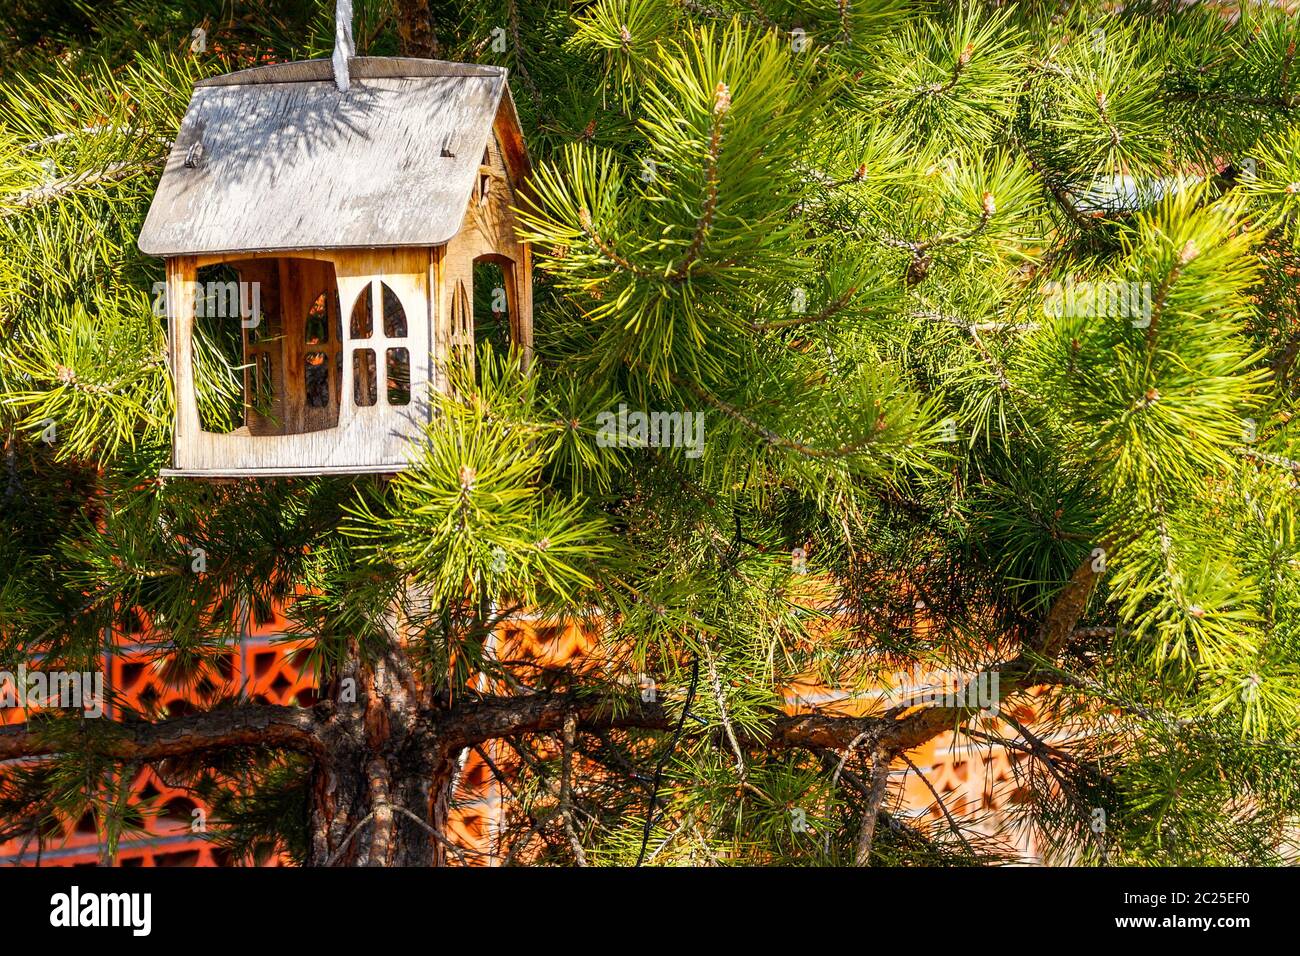 A new bird feeder in the shape of a house is hanging on a green spruce branch. Stock Photo